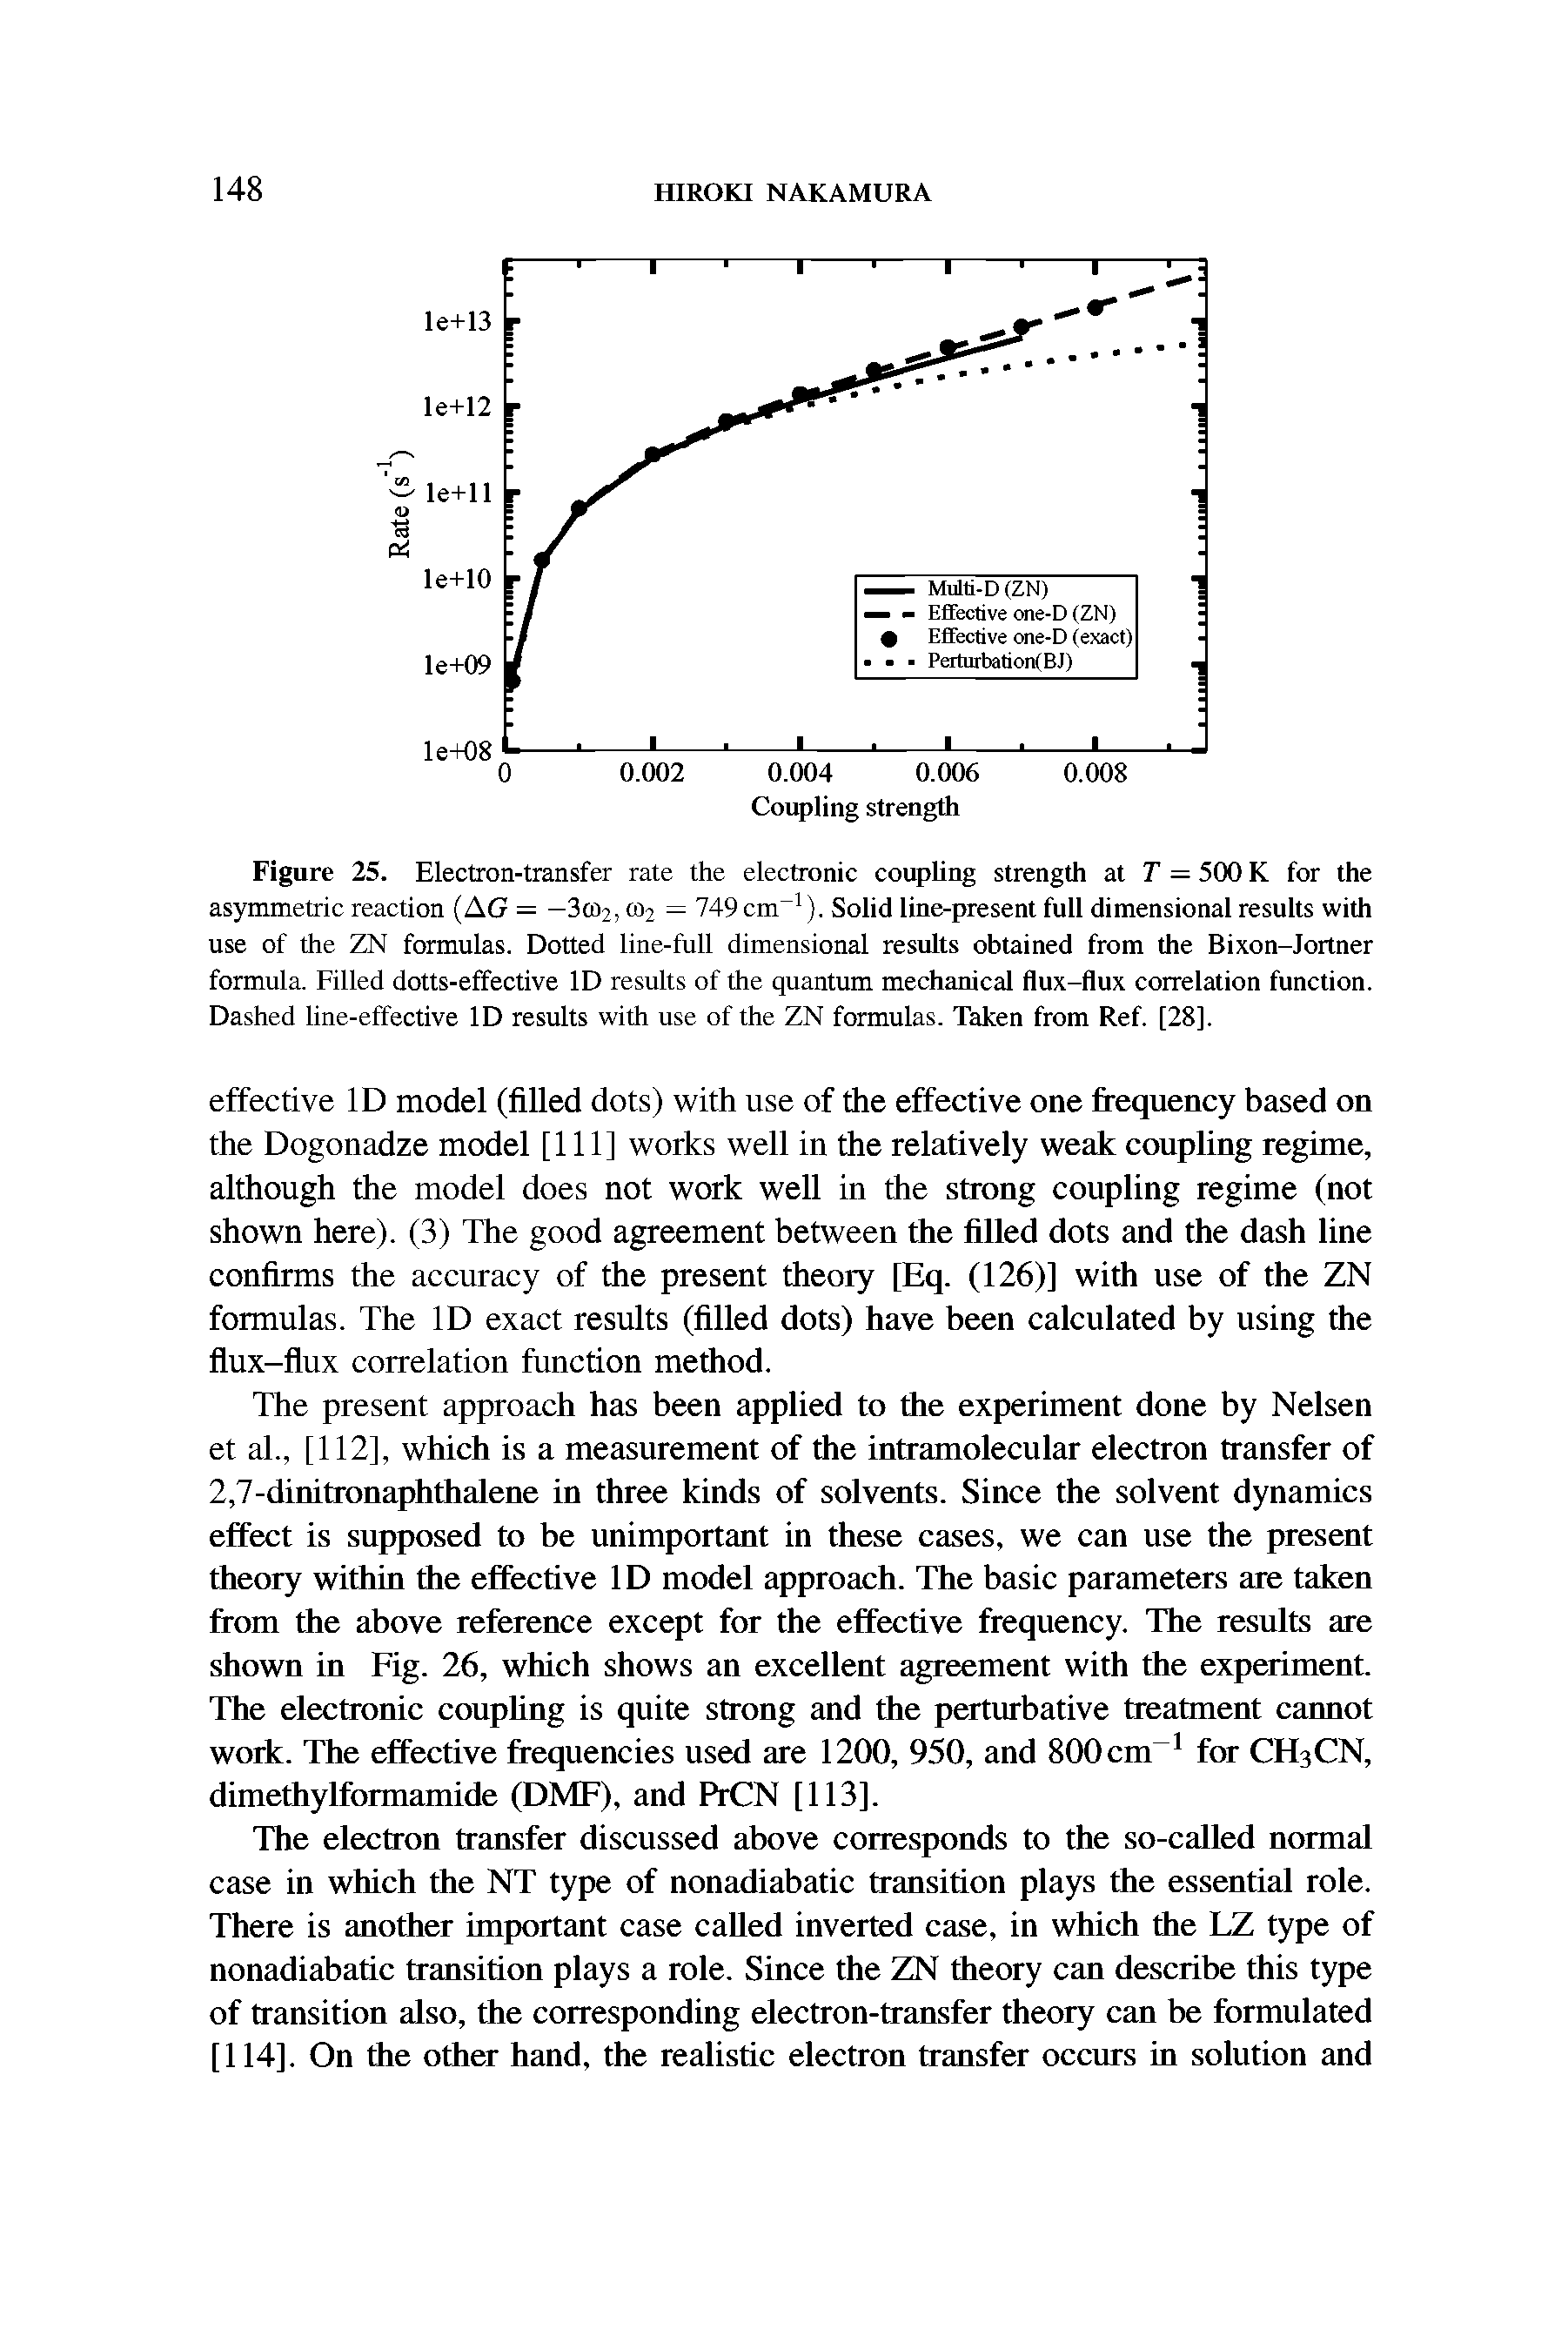 Figure 25. Electron-transfer rate the electronic coupling strength at T = 500 K for the asymmetric reaction (AG = —3ffl2, oh = 749 cm ). Solid line-present full dimensional results with use of the ZN formulas. Dotted line-full dimensional results obtained from the Bixon-Jortner formula. Filled dotts-effective ID results of the quantum mechanical flux-flux correlation function. Dashed line-effective ID results with use of the ZN formulas. Taken from Ref. [28].